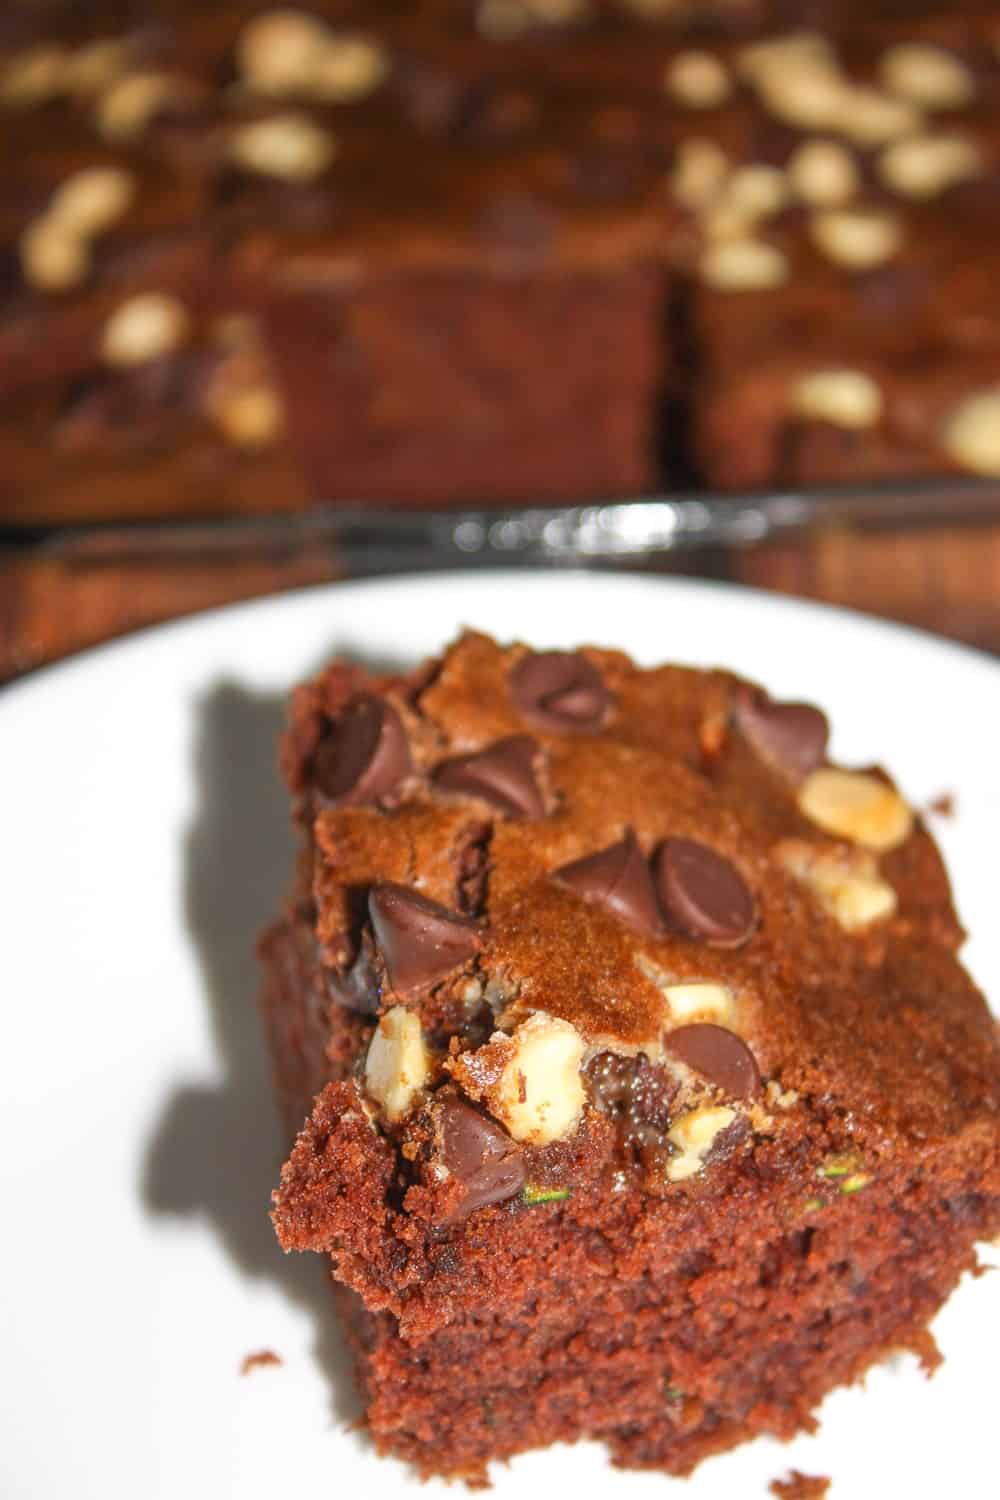 Chocolate Zucchini Cake combines a fall squash and fall spices.  The fall spices create a unique flavour combination for this seasonal chocolate cake.